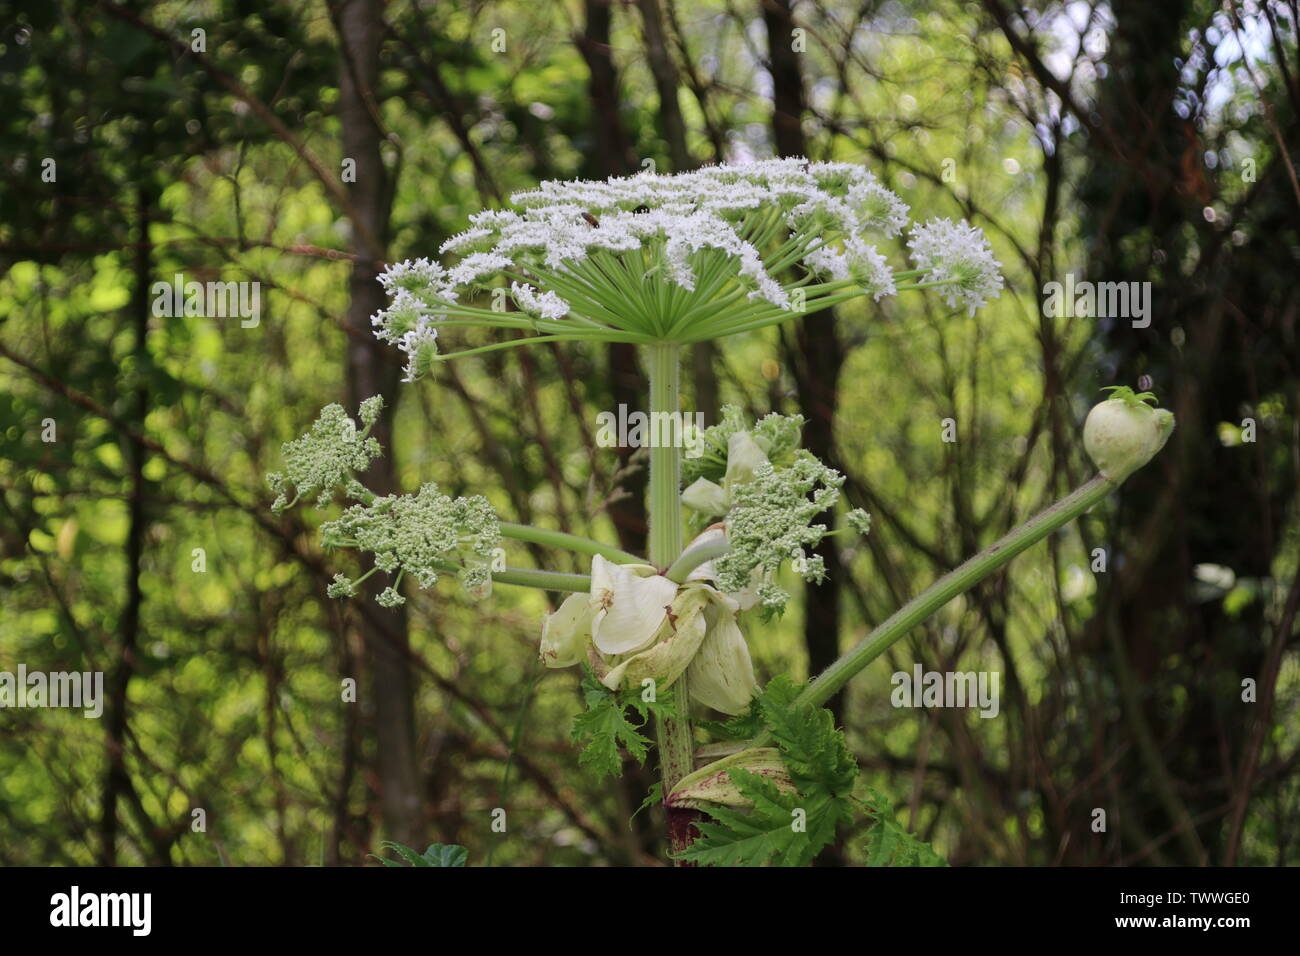 Hogweed flowers along the side of the road in Capelle aan den IJssel which can harm people and animals Stock Photo